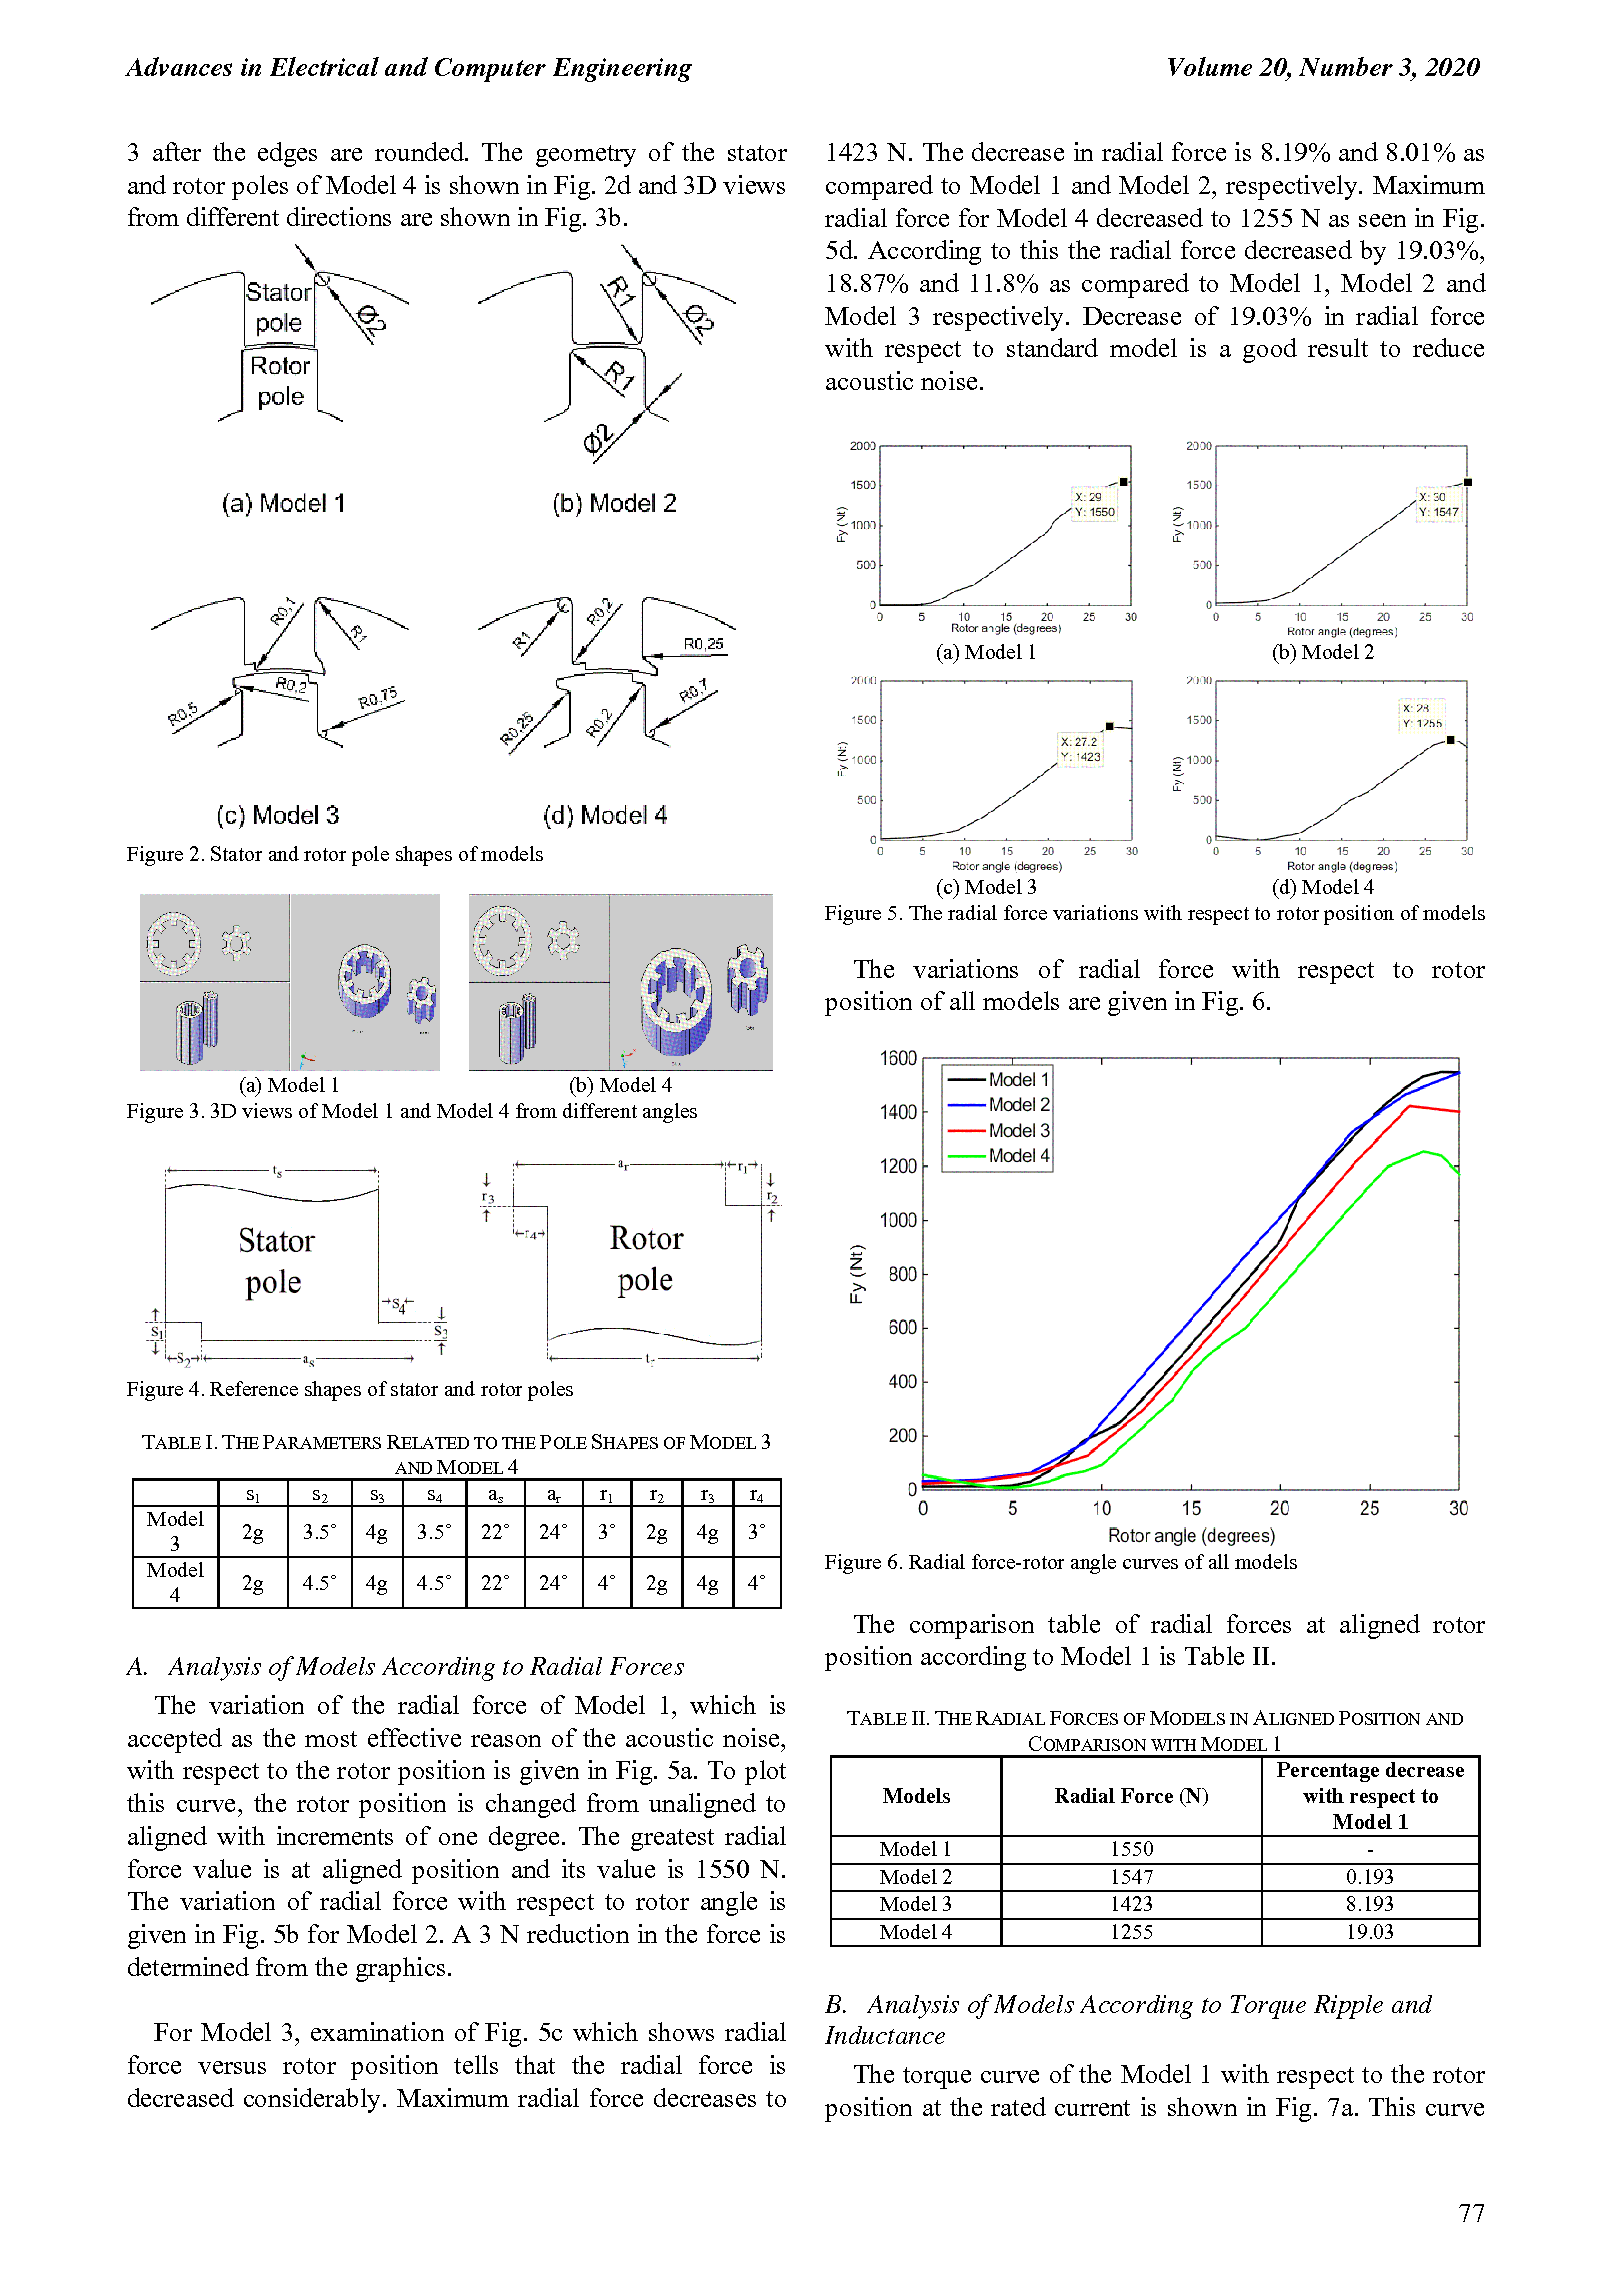 PDF Quickview for paper with DOI:10.4316/AECE.2020.03009